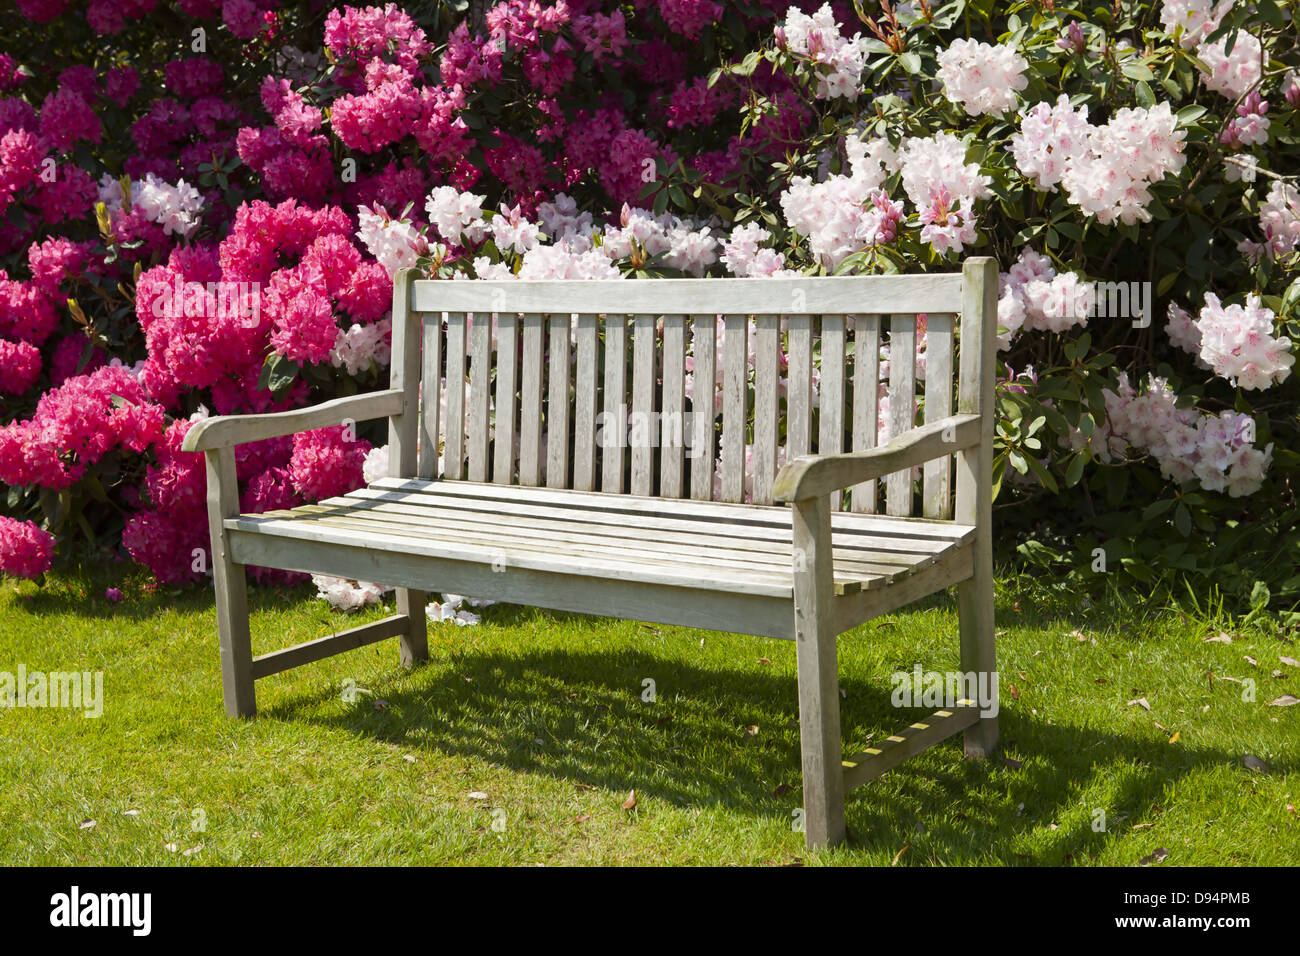 Spring garden with rhododendron blooms and old wooden bench. Stock Photo